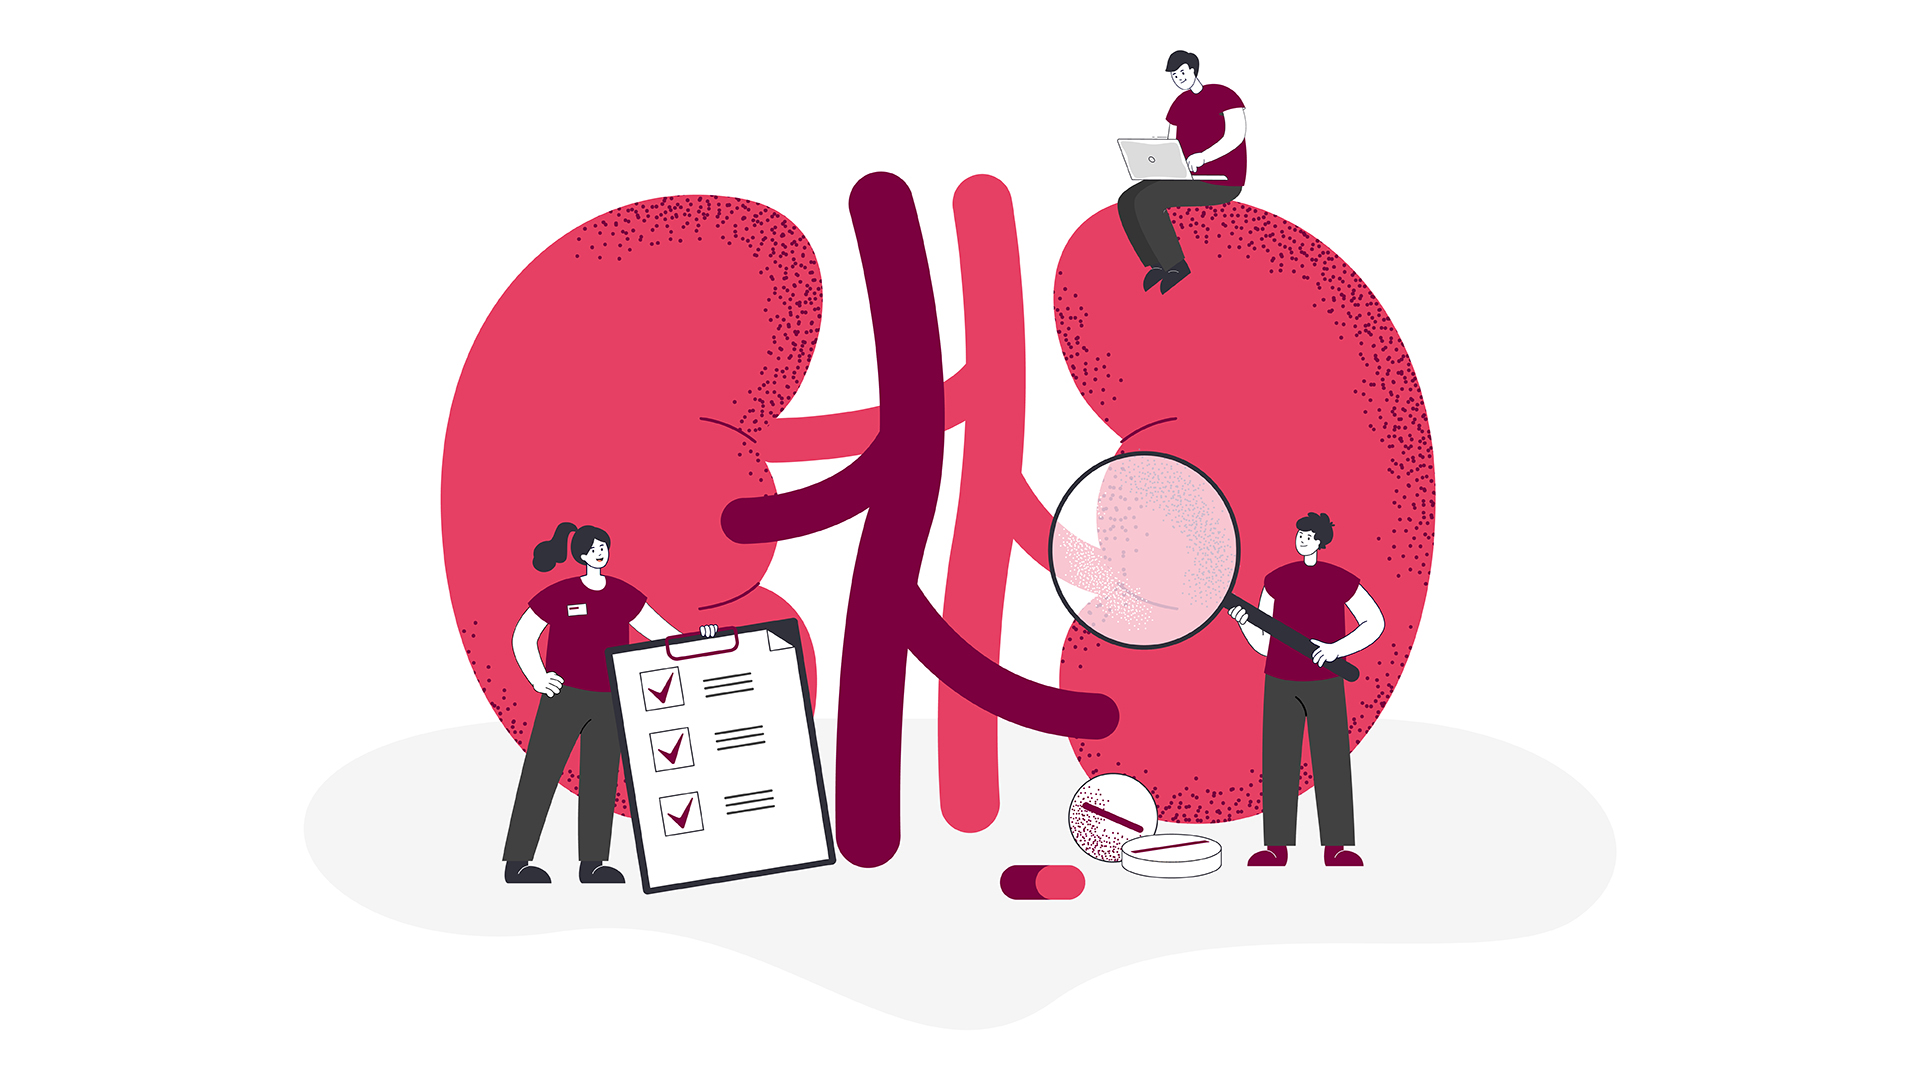 Doctors check health of kidneys and urinary system in clinic. Medical study of tiny people with chronic kidney diseases and physiology flat vector illustration. Urology, nephrology, dialysis concept